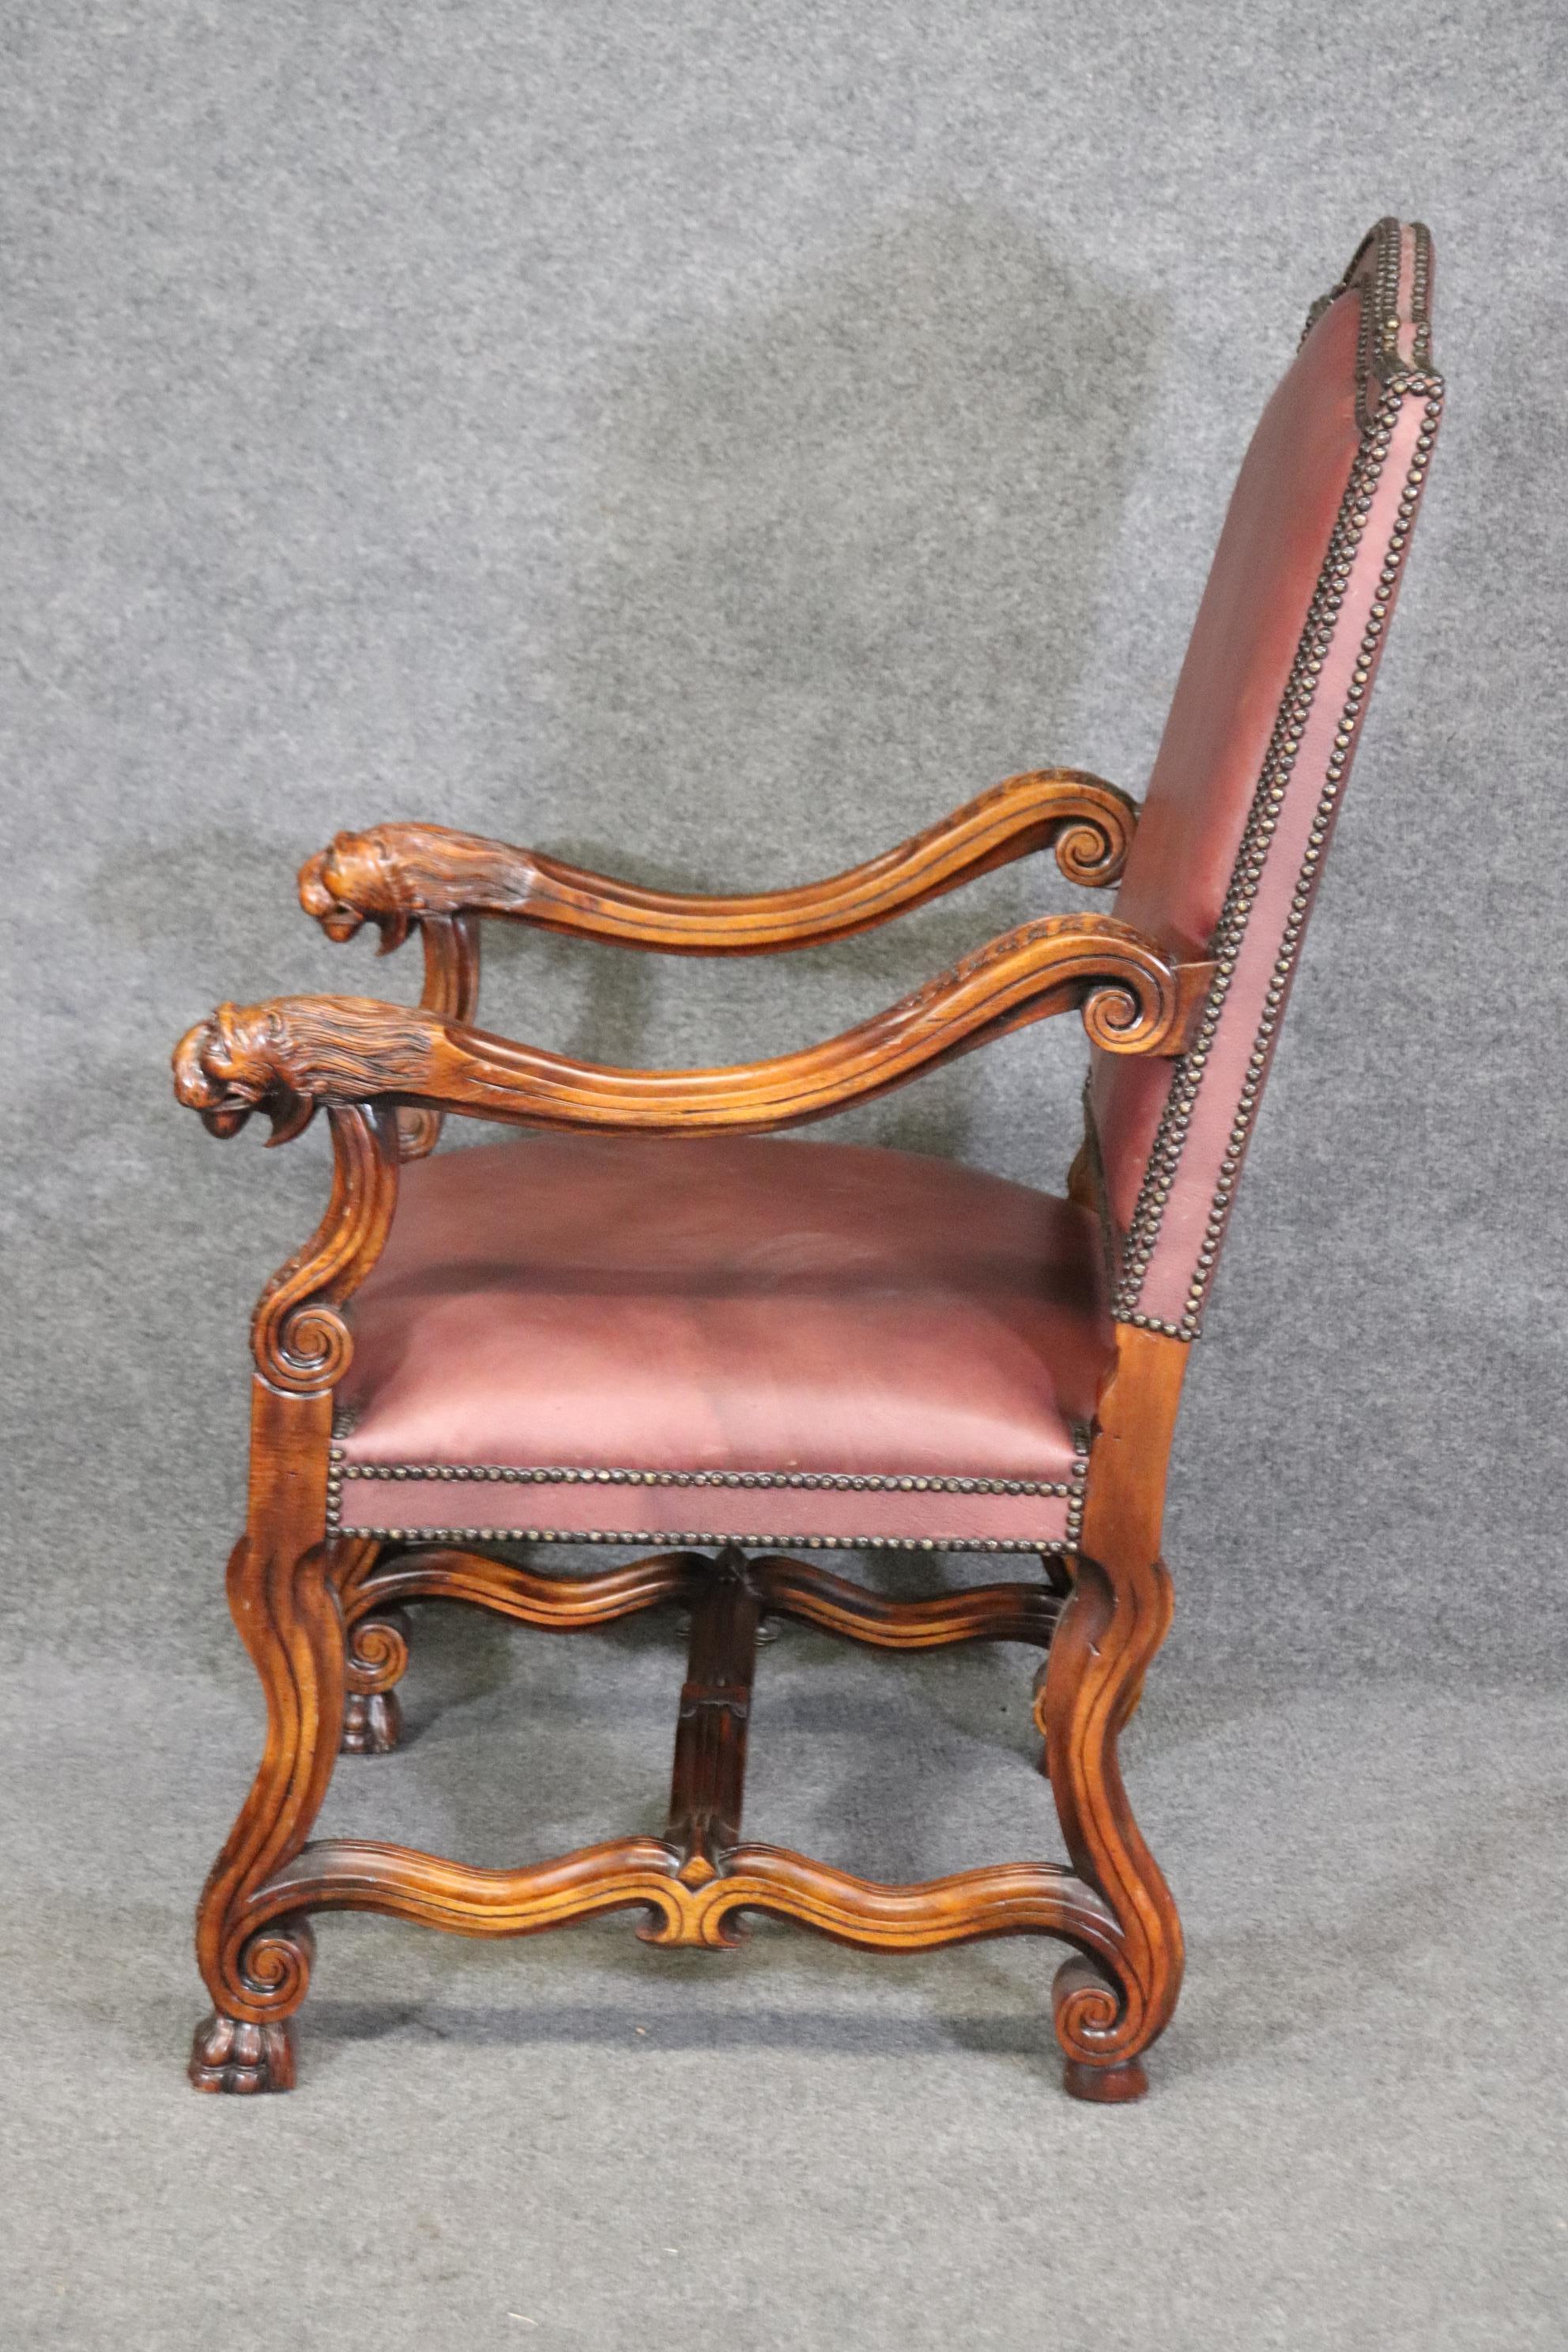 Superb Double Nail Head Trimmed Leather Carved Lion Head Throne Arm Chair In Good Condition For Sale In Swedesboro, NJ